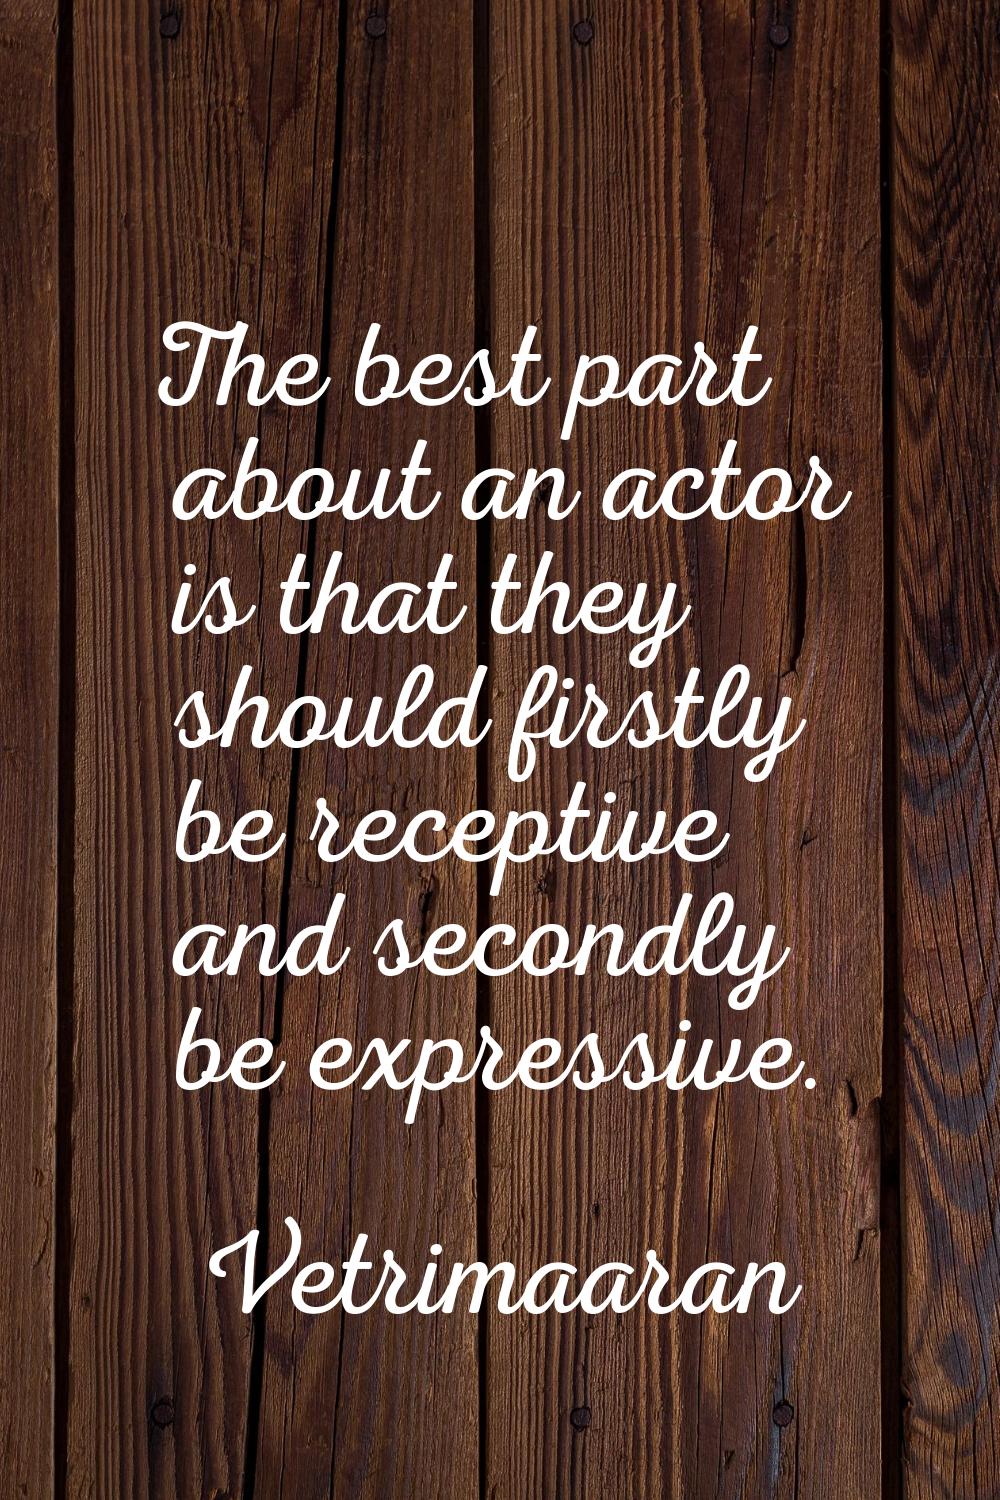 The best part about an actor is that they should firstly be receptive and secondly be expressive.